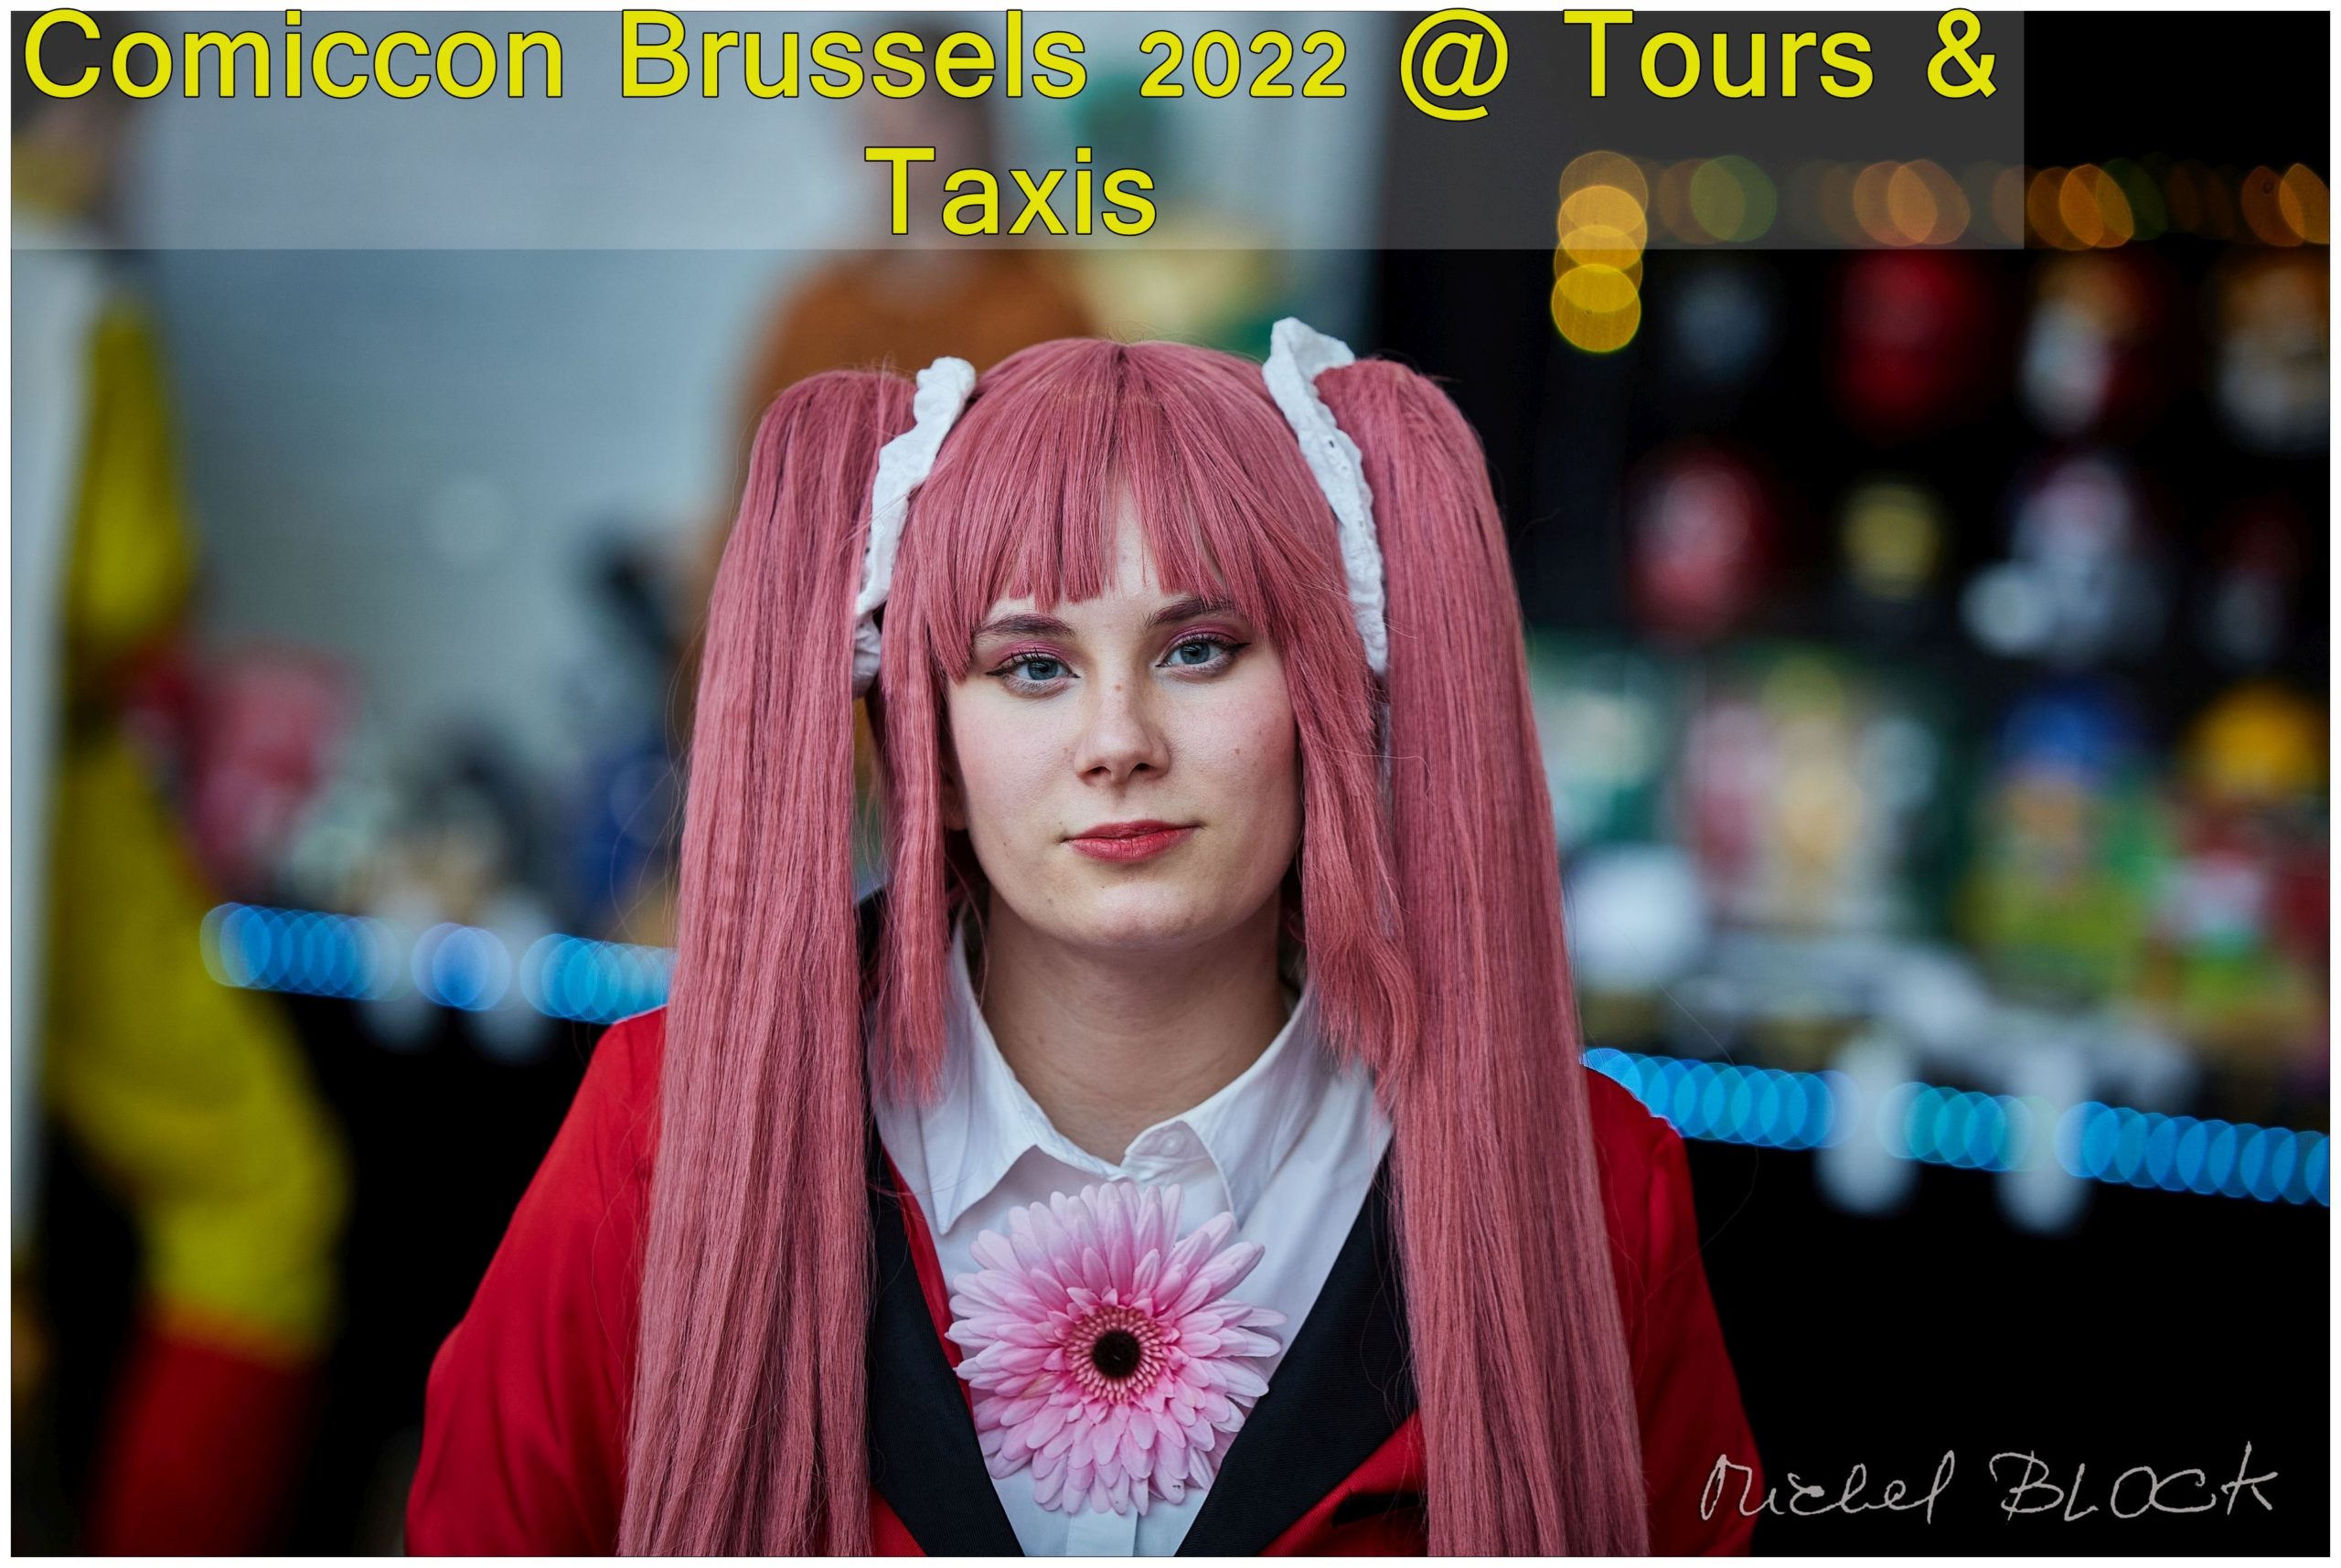 Comiccon 2022 @ Tours & Taxis Brussels